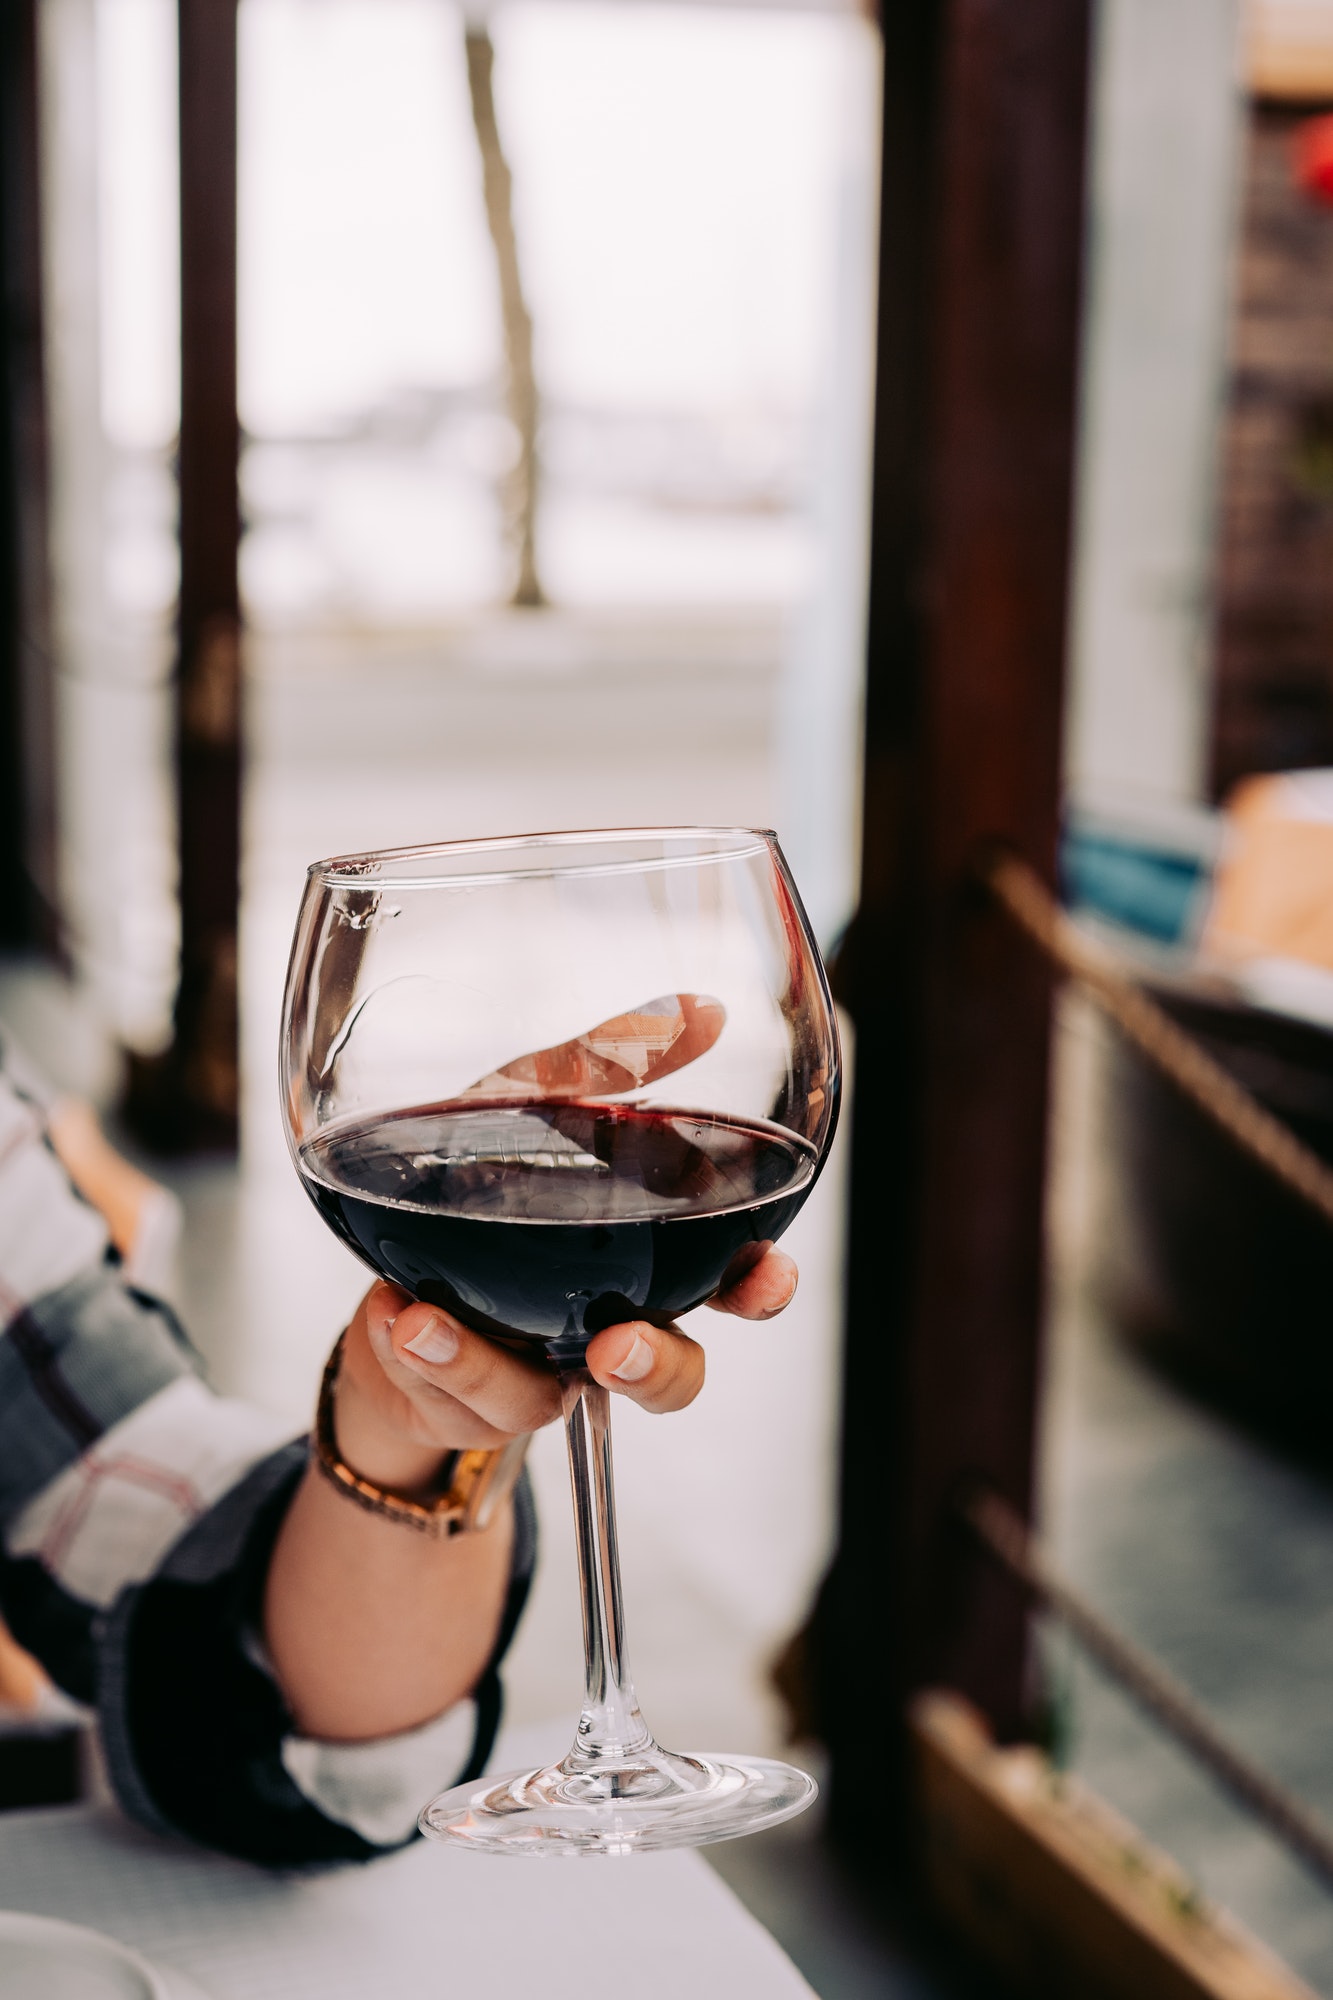 Woman hand holding a wine glass with red wine